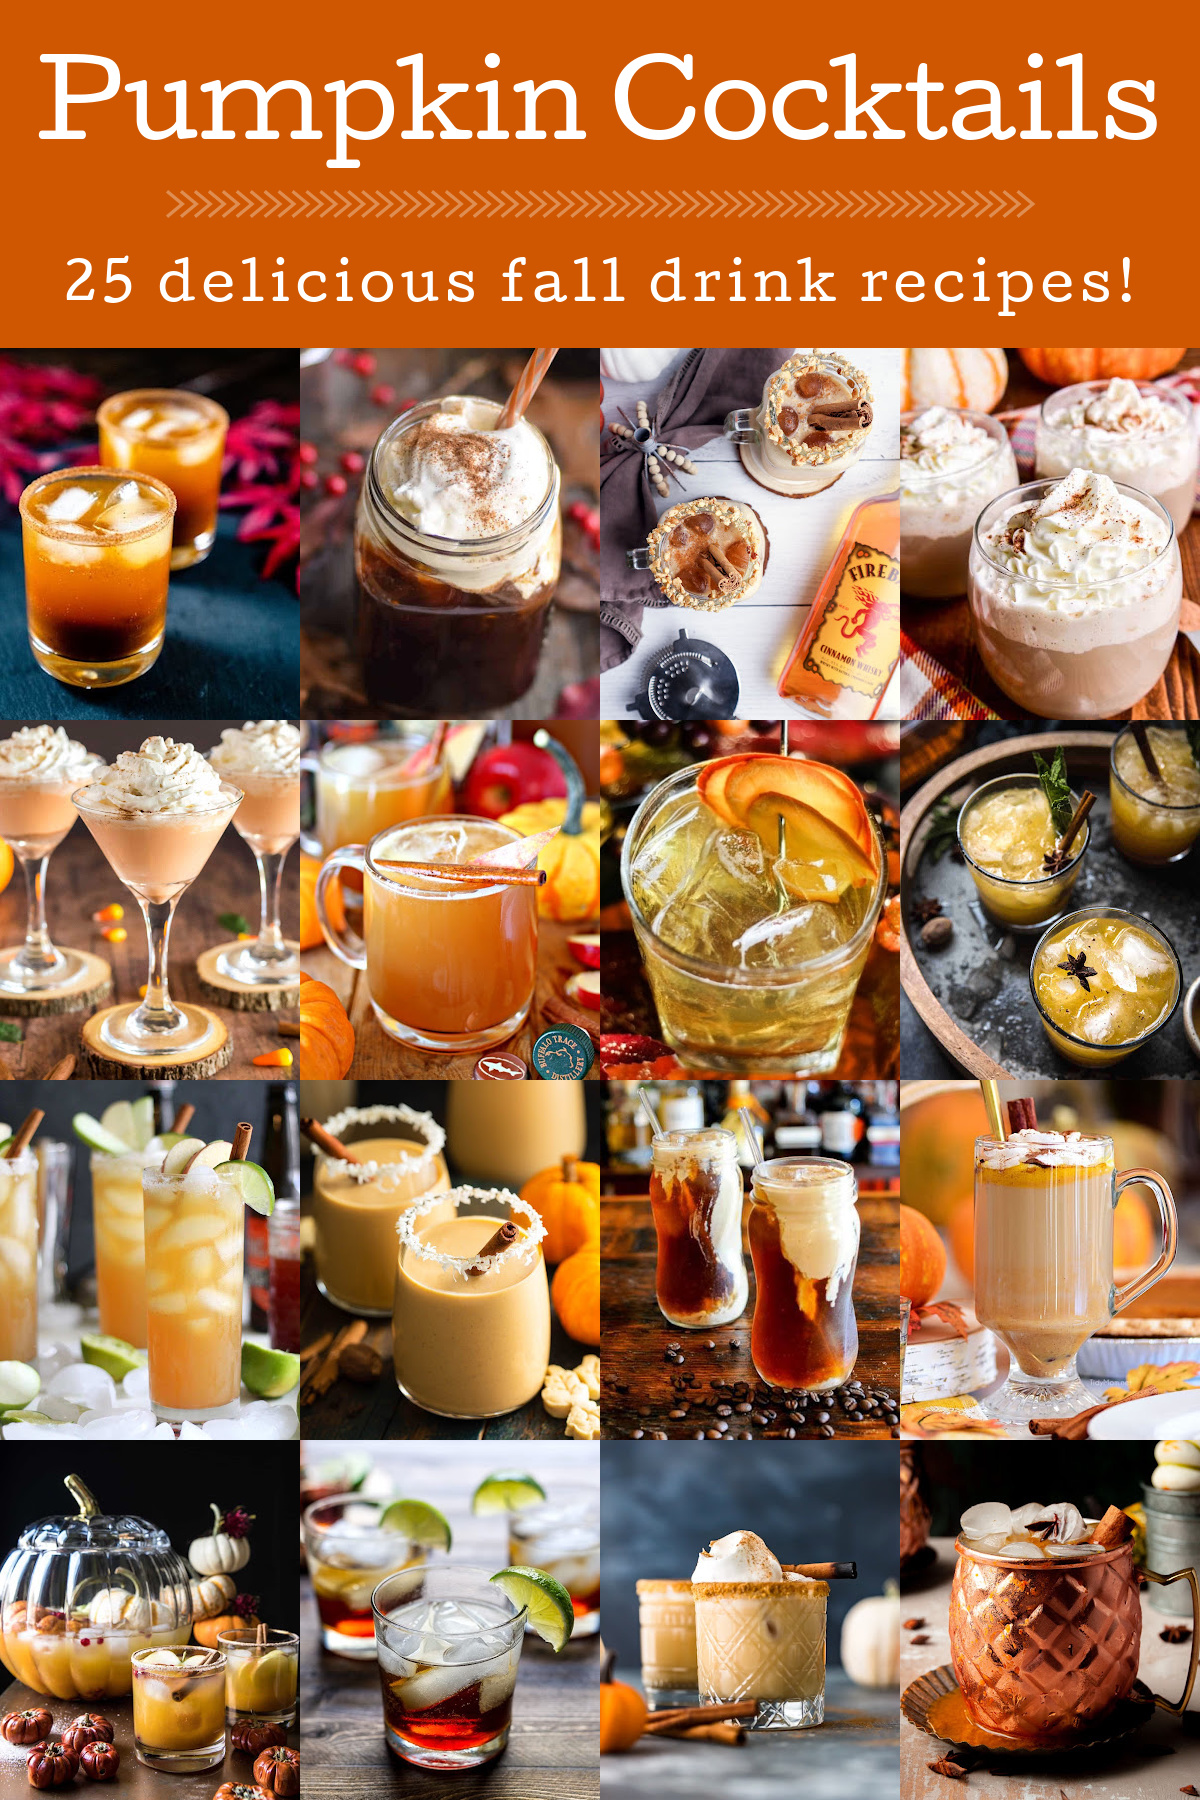 Pumpkin Cocktails for Fall